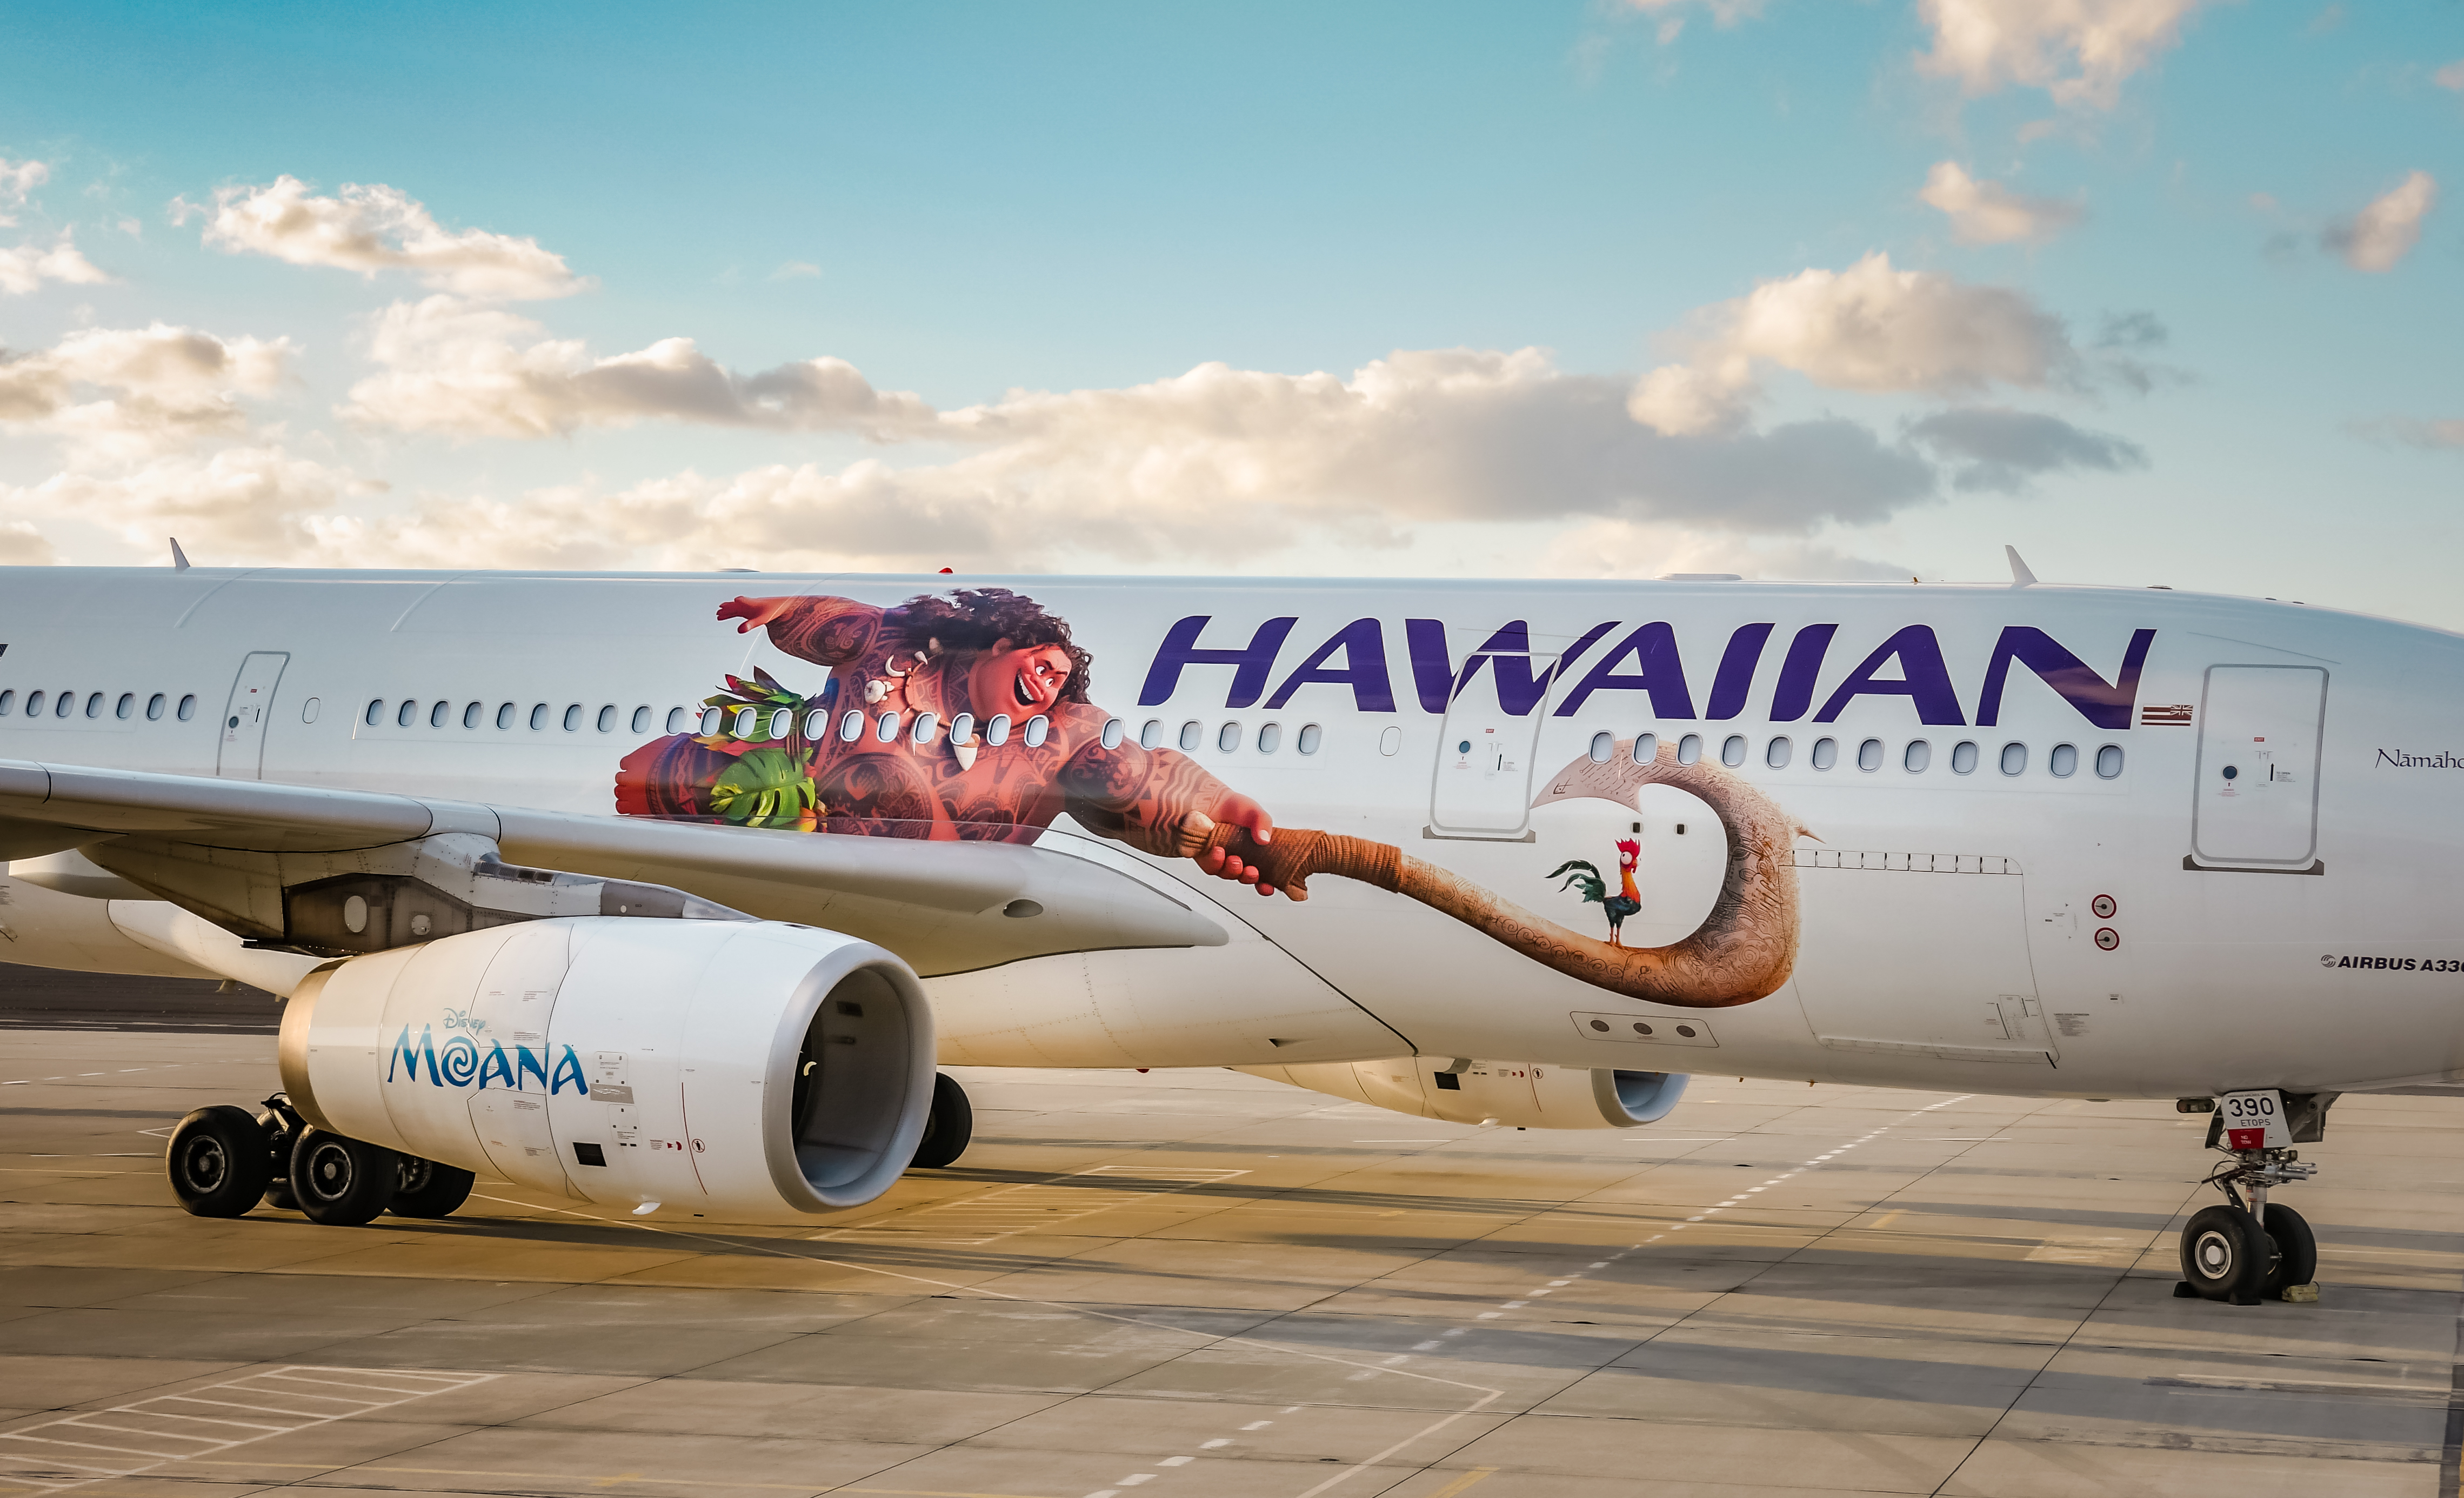 PC: Hawaiian Airlines. Second "Moana" themed aircraft unveiled. 